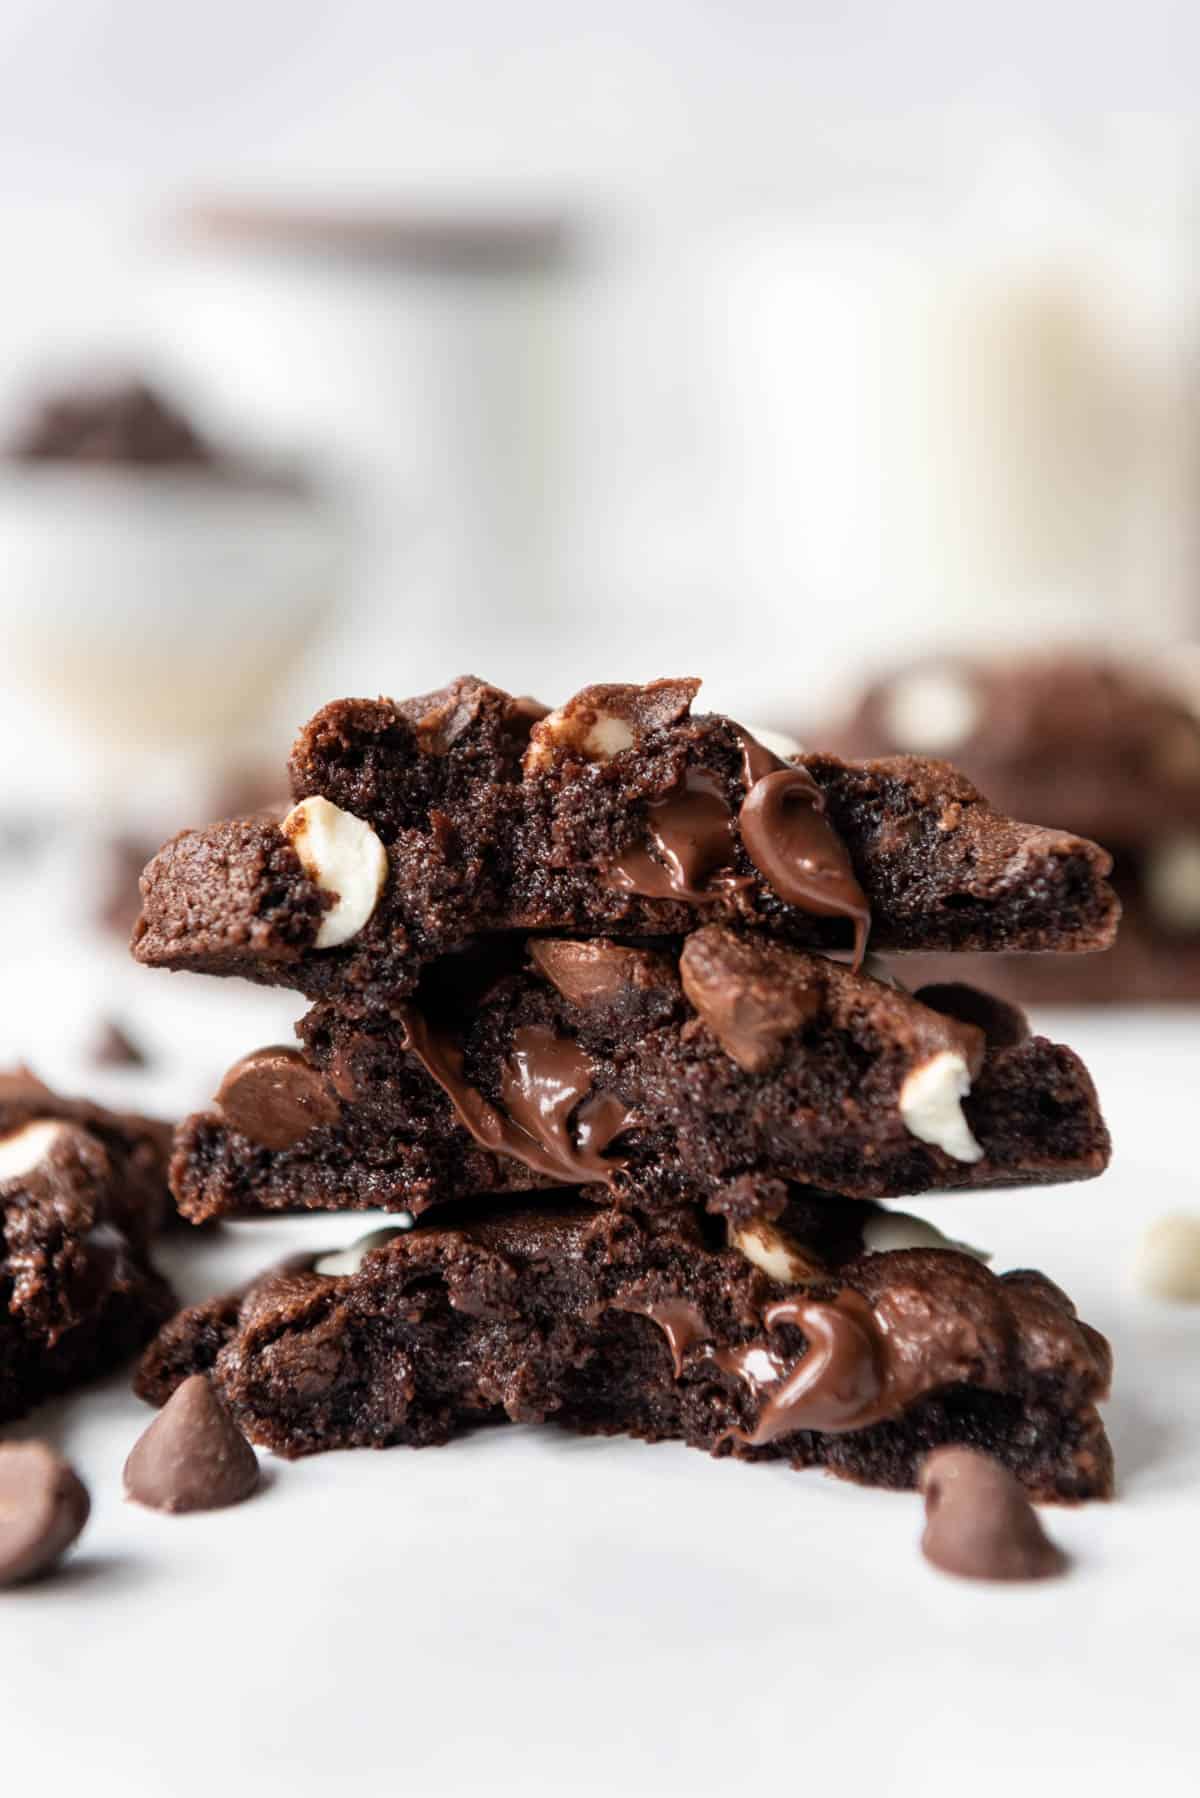 Chocolate cookies broken in half and stacked with melted chocolate chips inside.